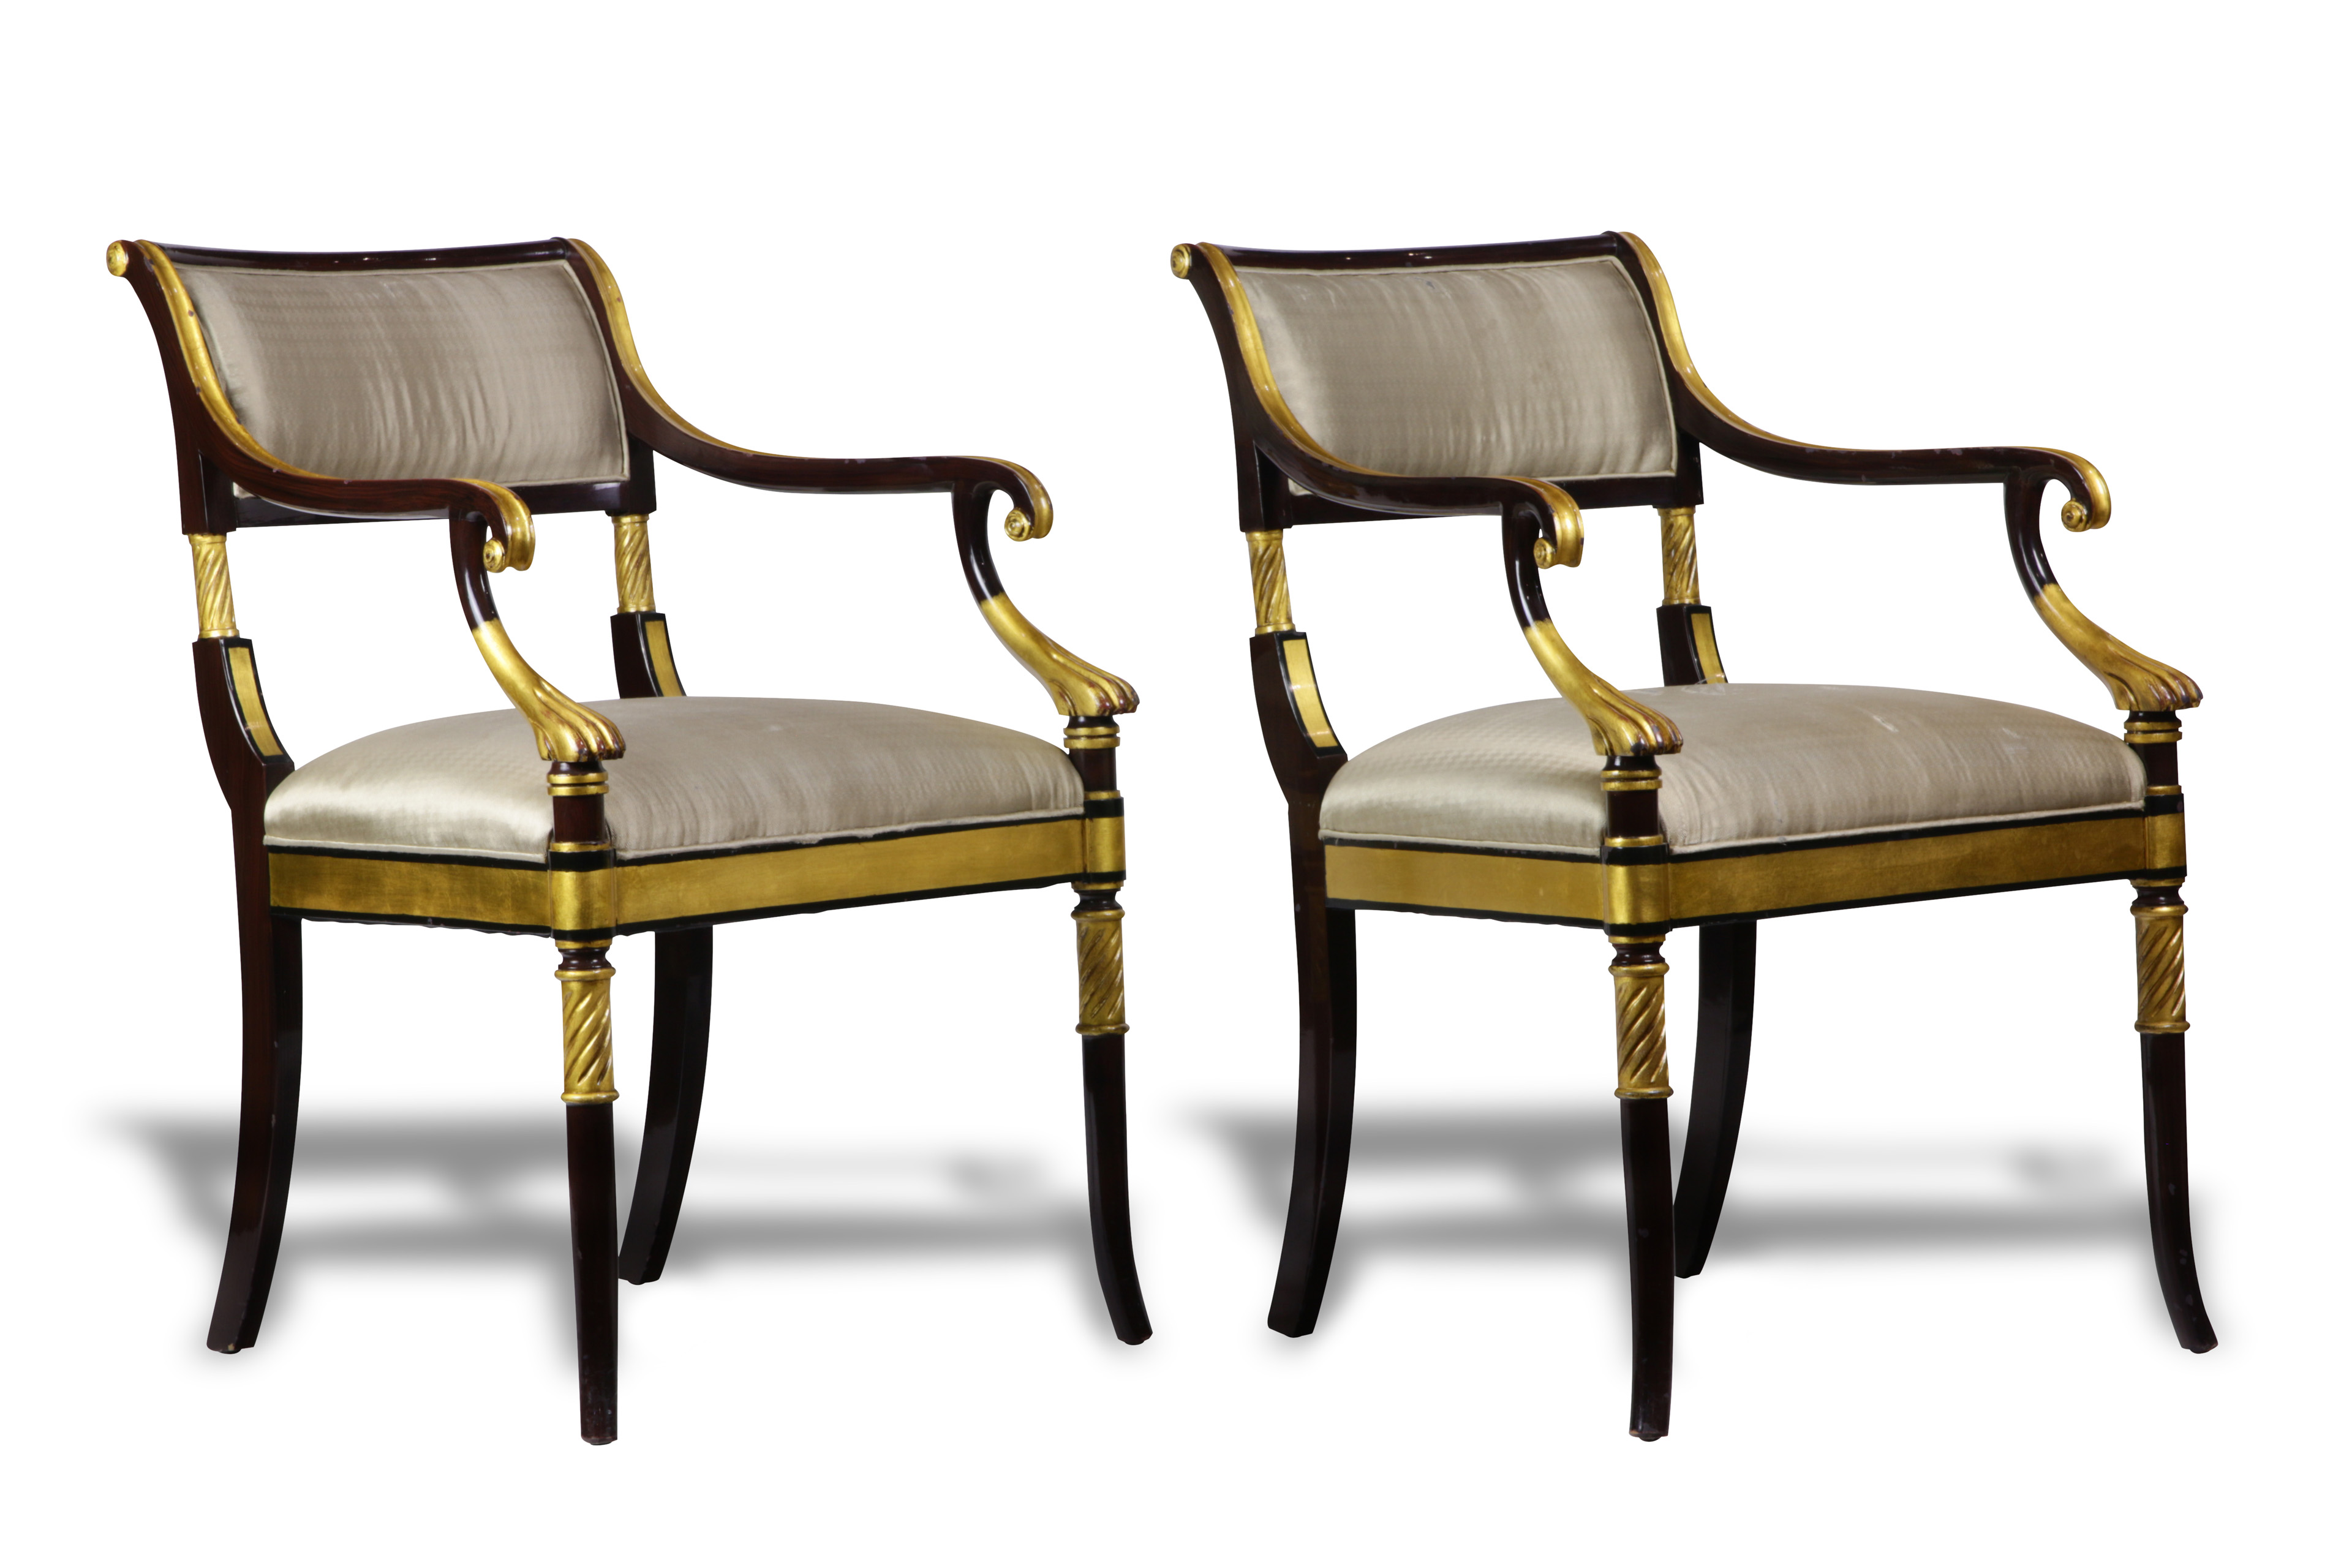 PAIR OF ENGLISH REGENCY STYLE PARTIAL